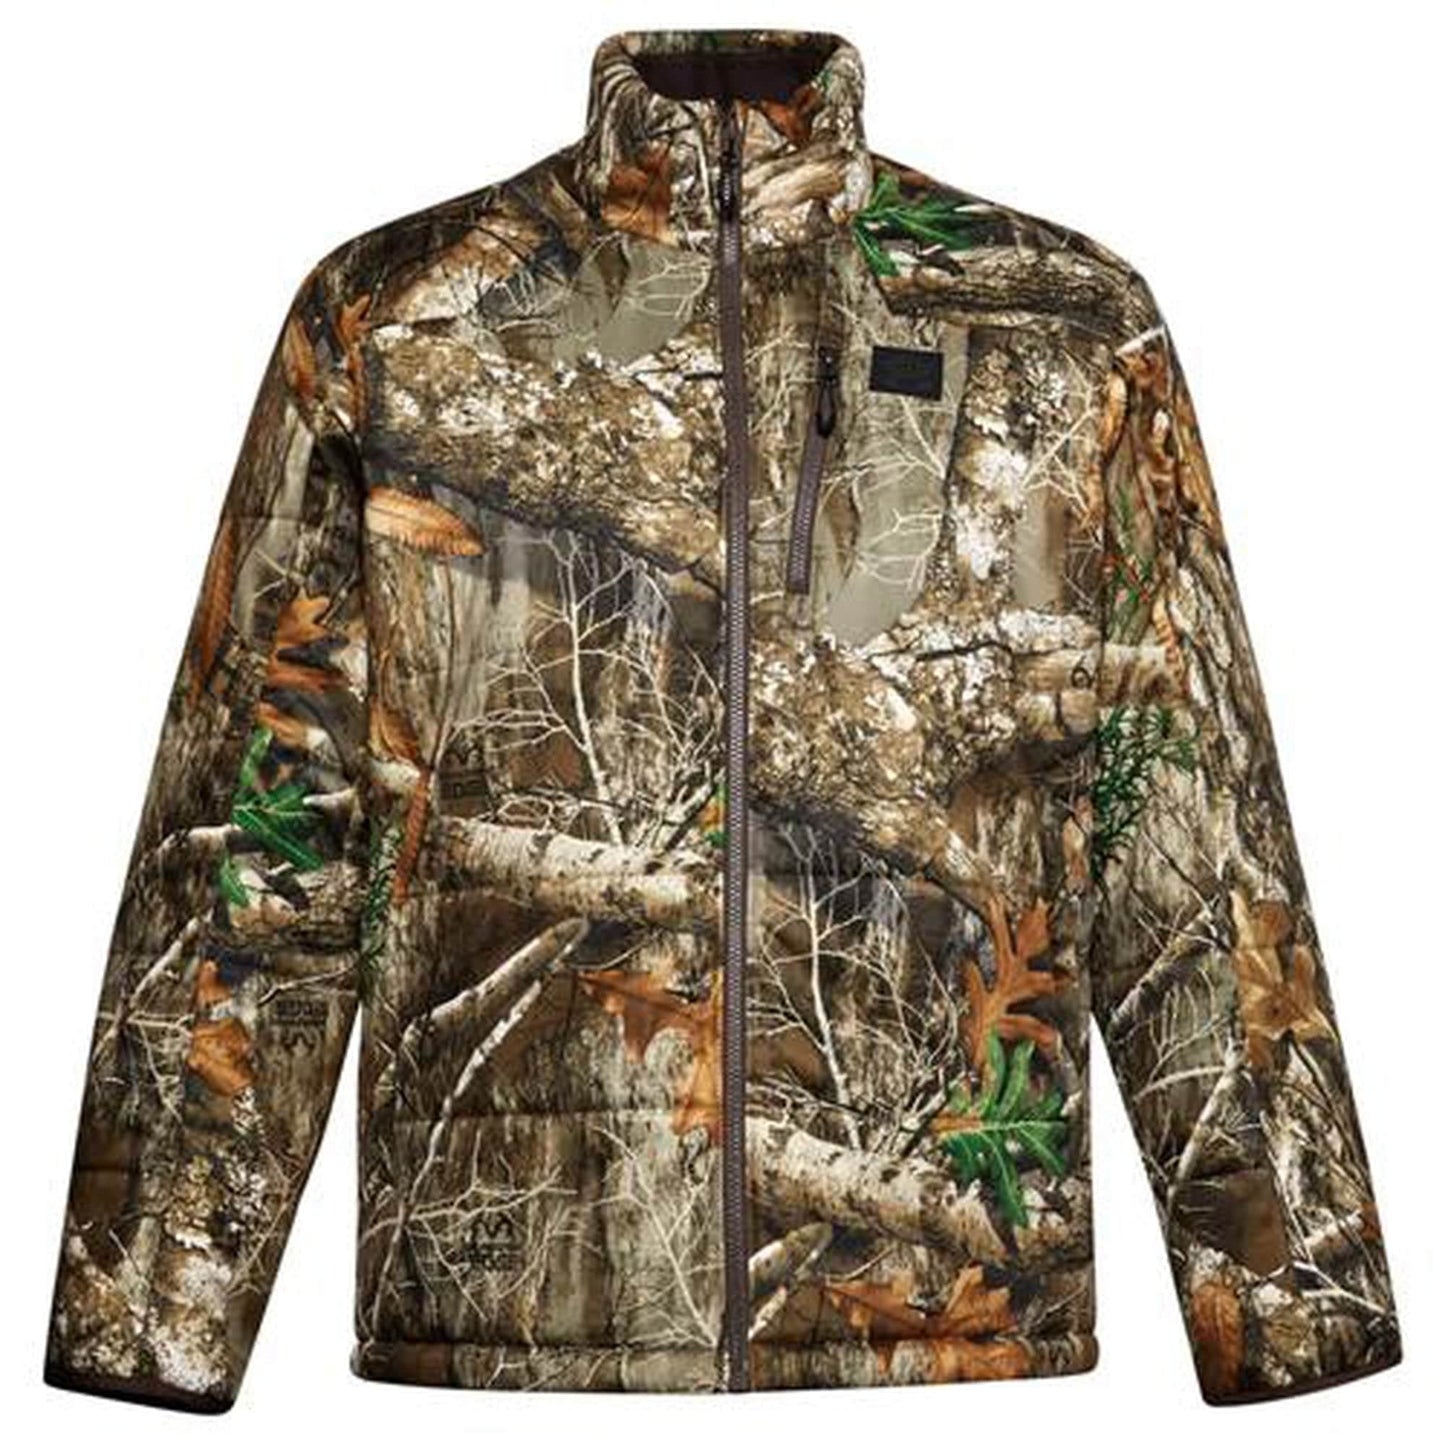 Under Armour Timber Jacket by Texas Fowlers